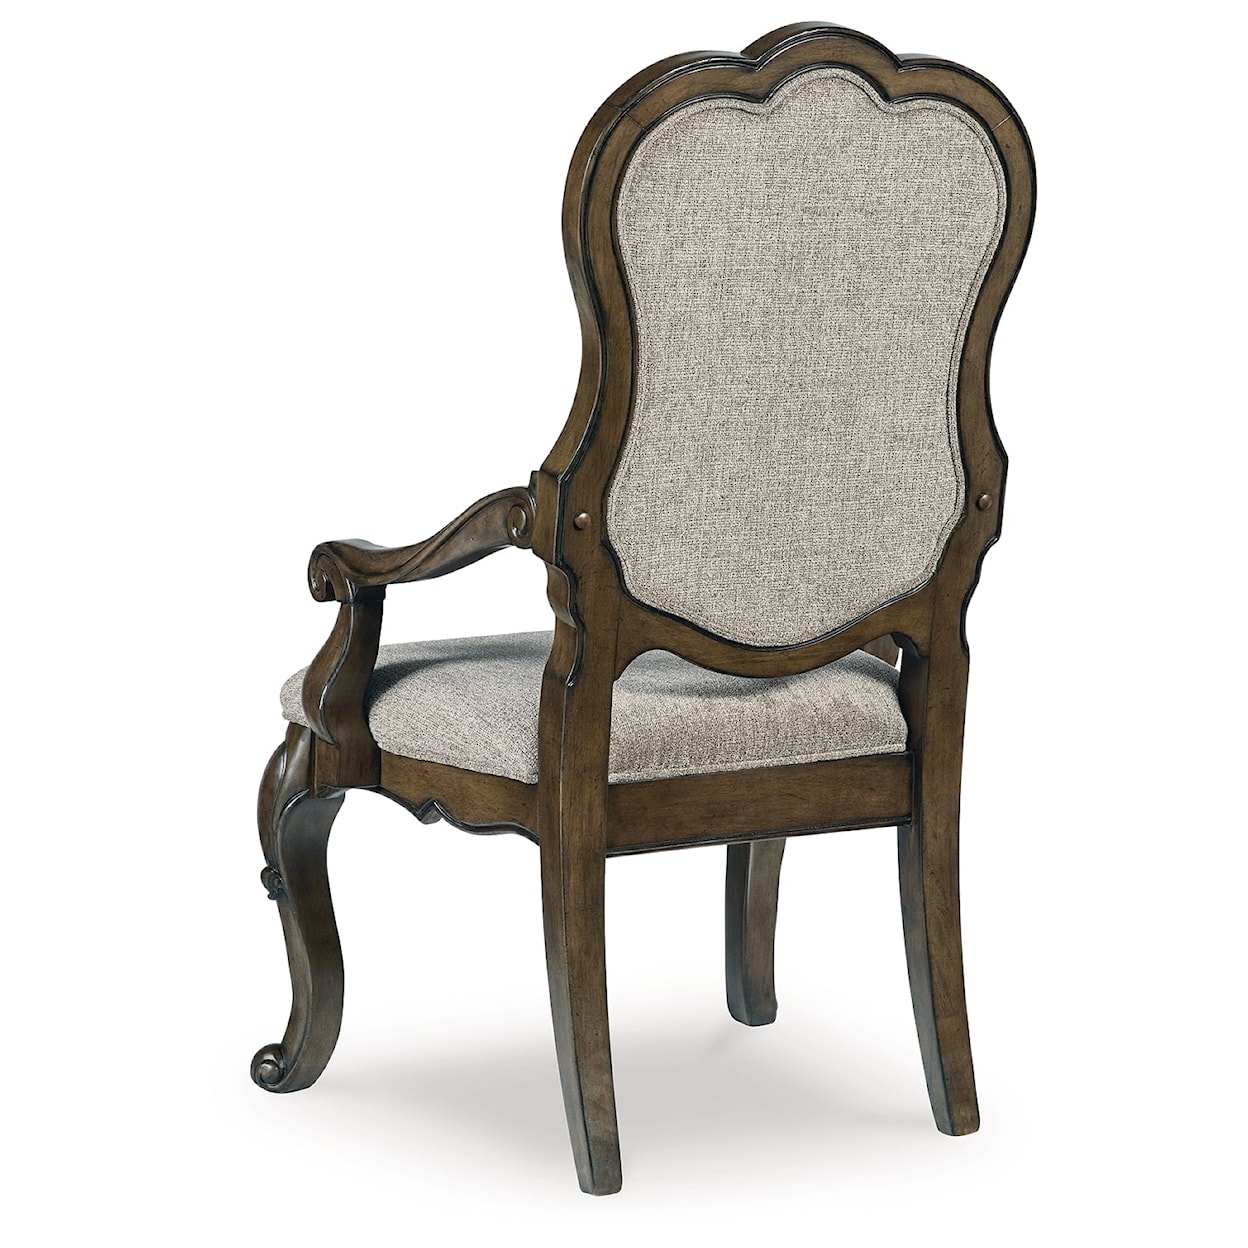 Benchcraft Maylee Dining Upholstered Arm Chair